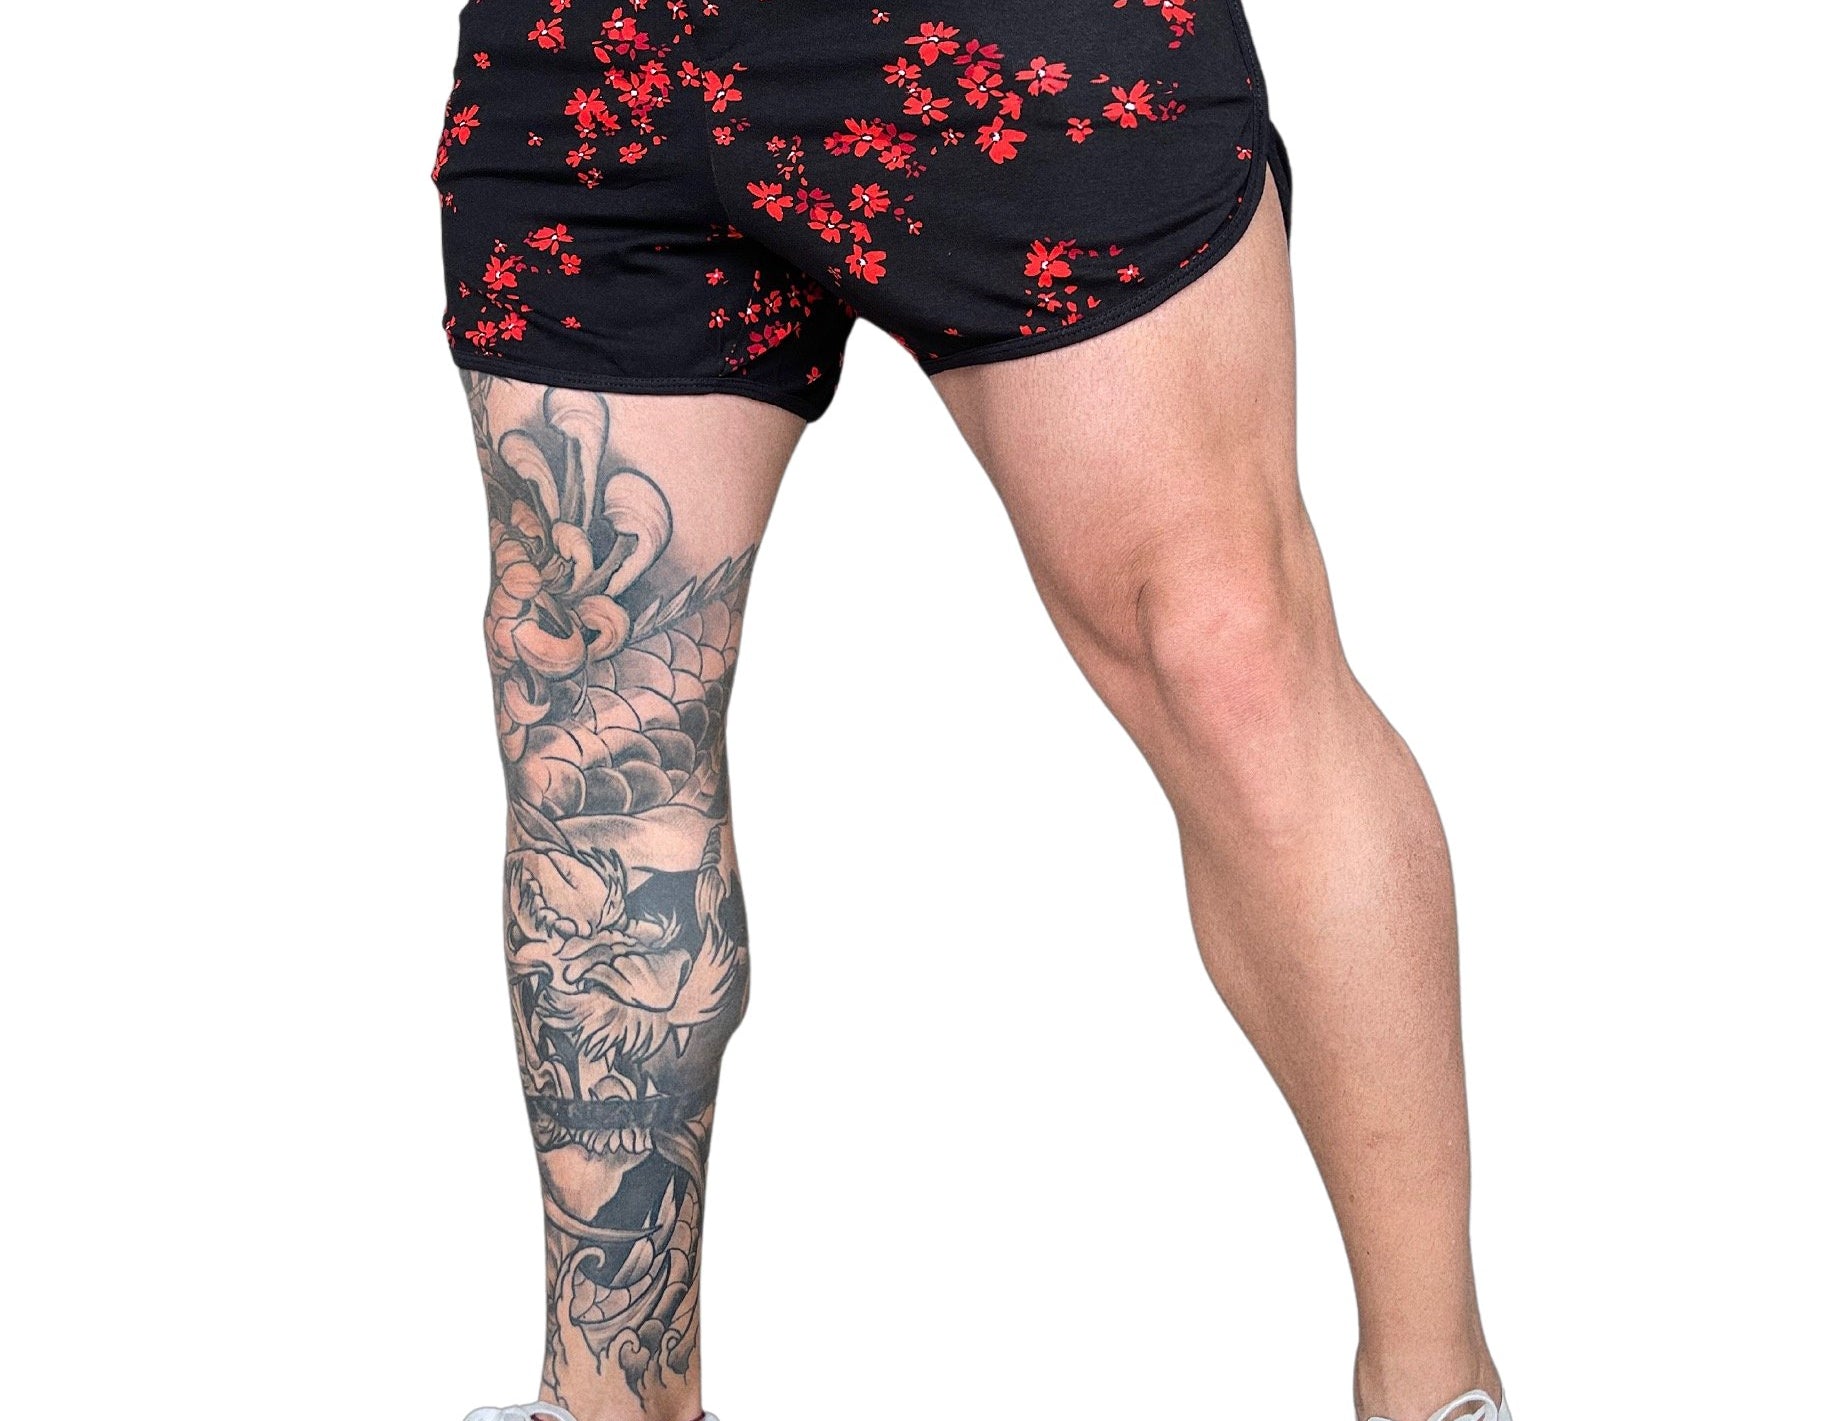 Phyllus - Men’s Shorts - Sarman Fashion - Wholesale Clothing Fashion Brand for Men from Canada